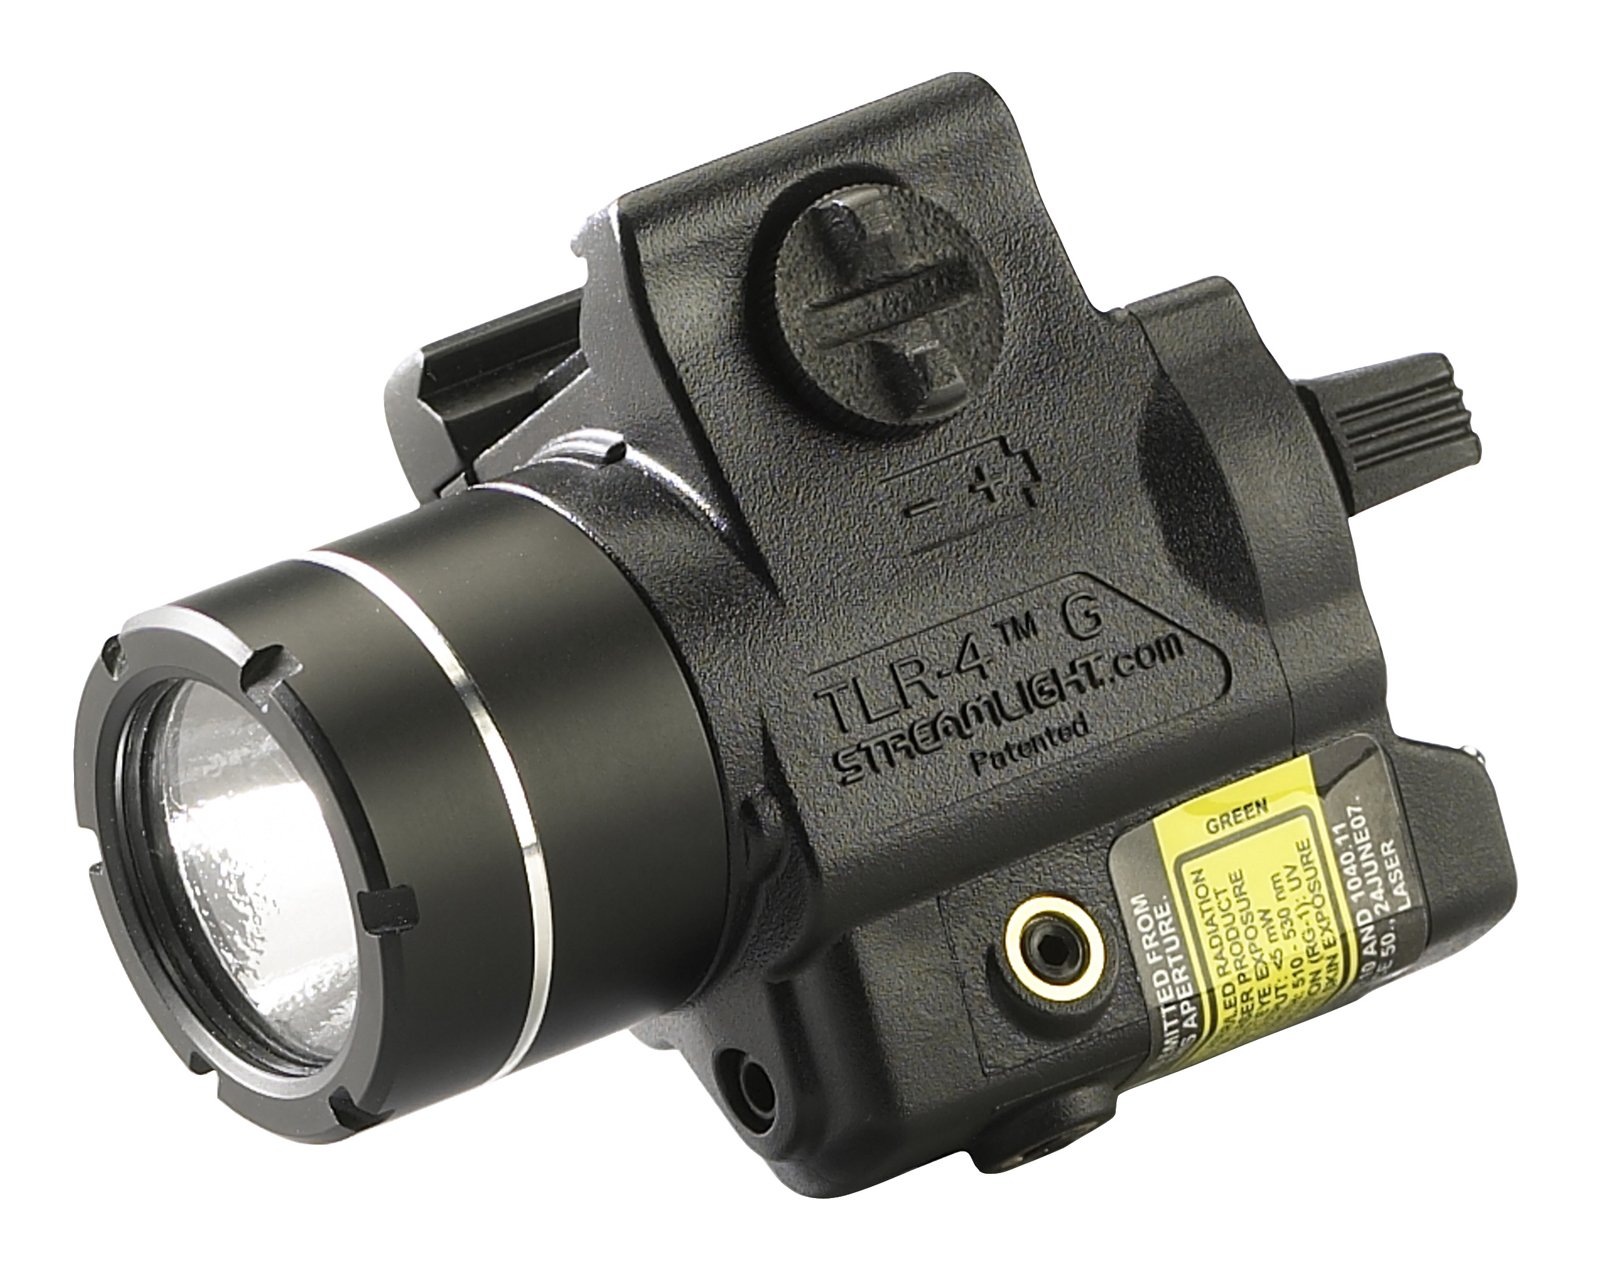 Streamlight 69245 TLR-4 Compact Rail Mounted Tactical Light with Integrated Green Laser and Wide Operating Range - 115 Lumens